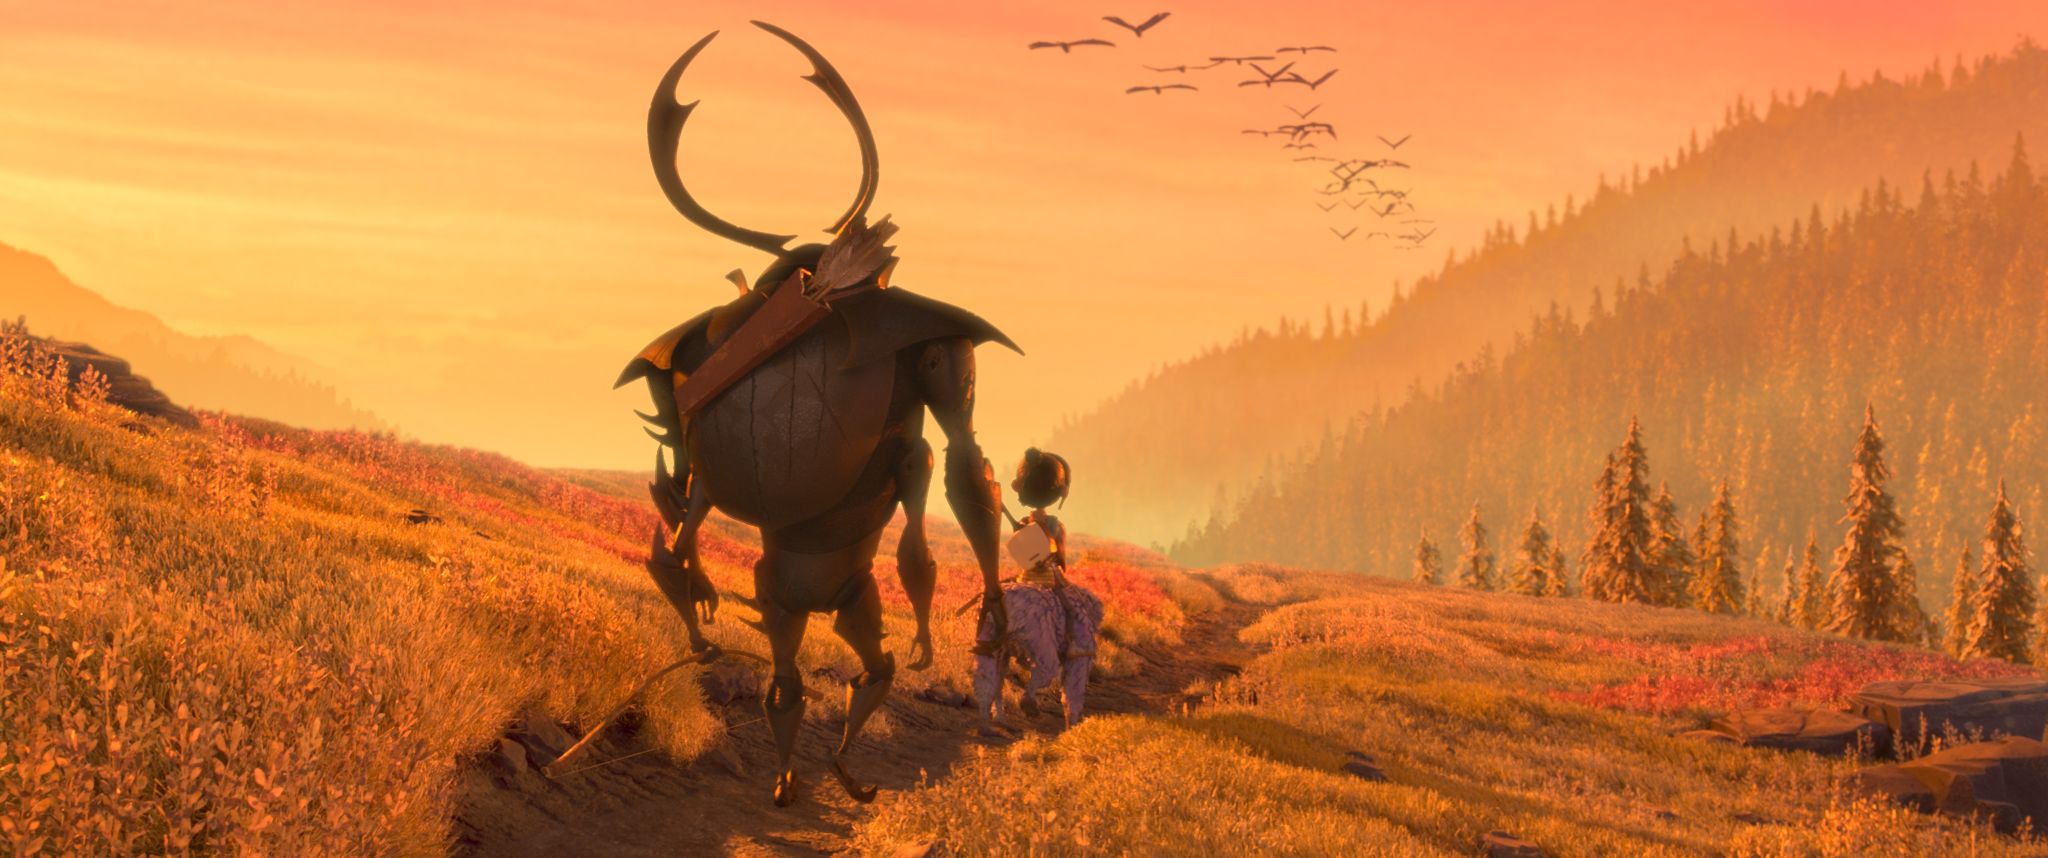 Kubo And The Two Strings #4